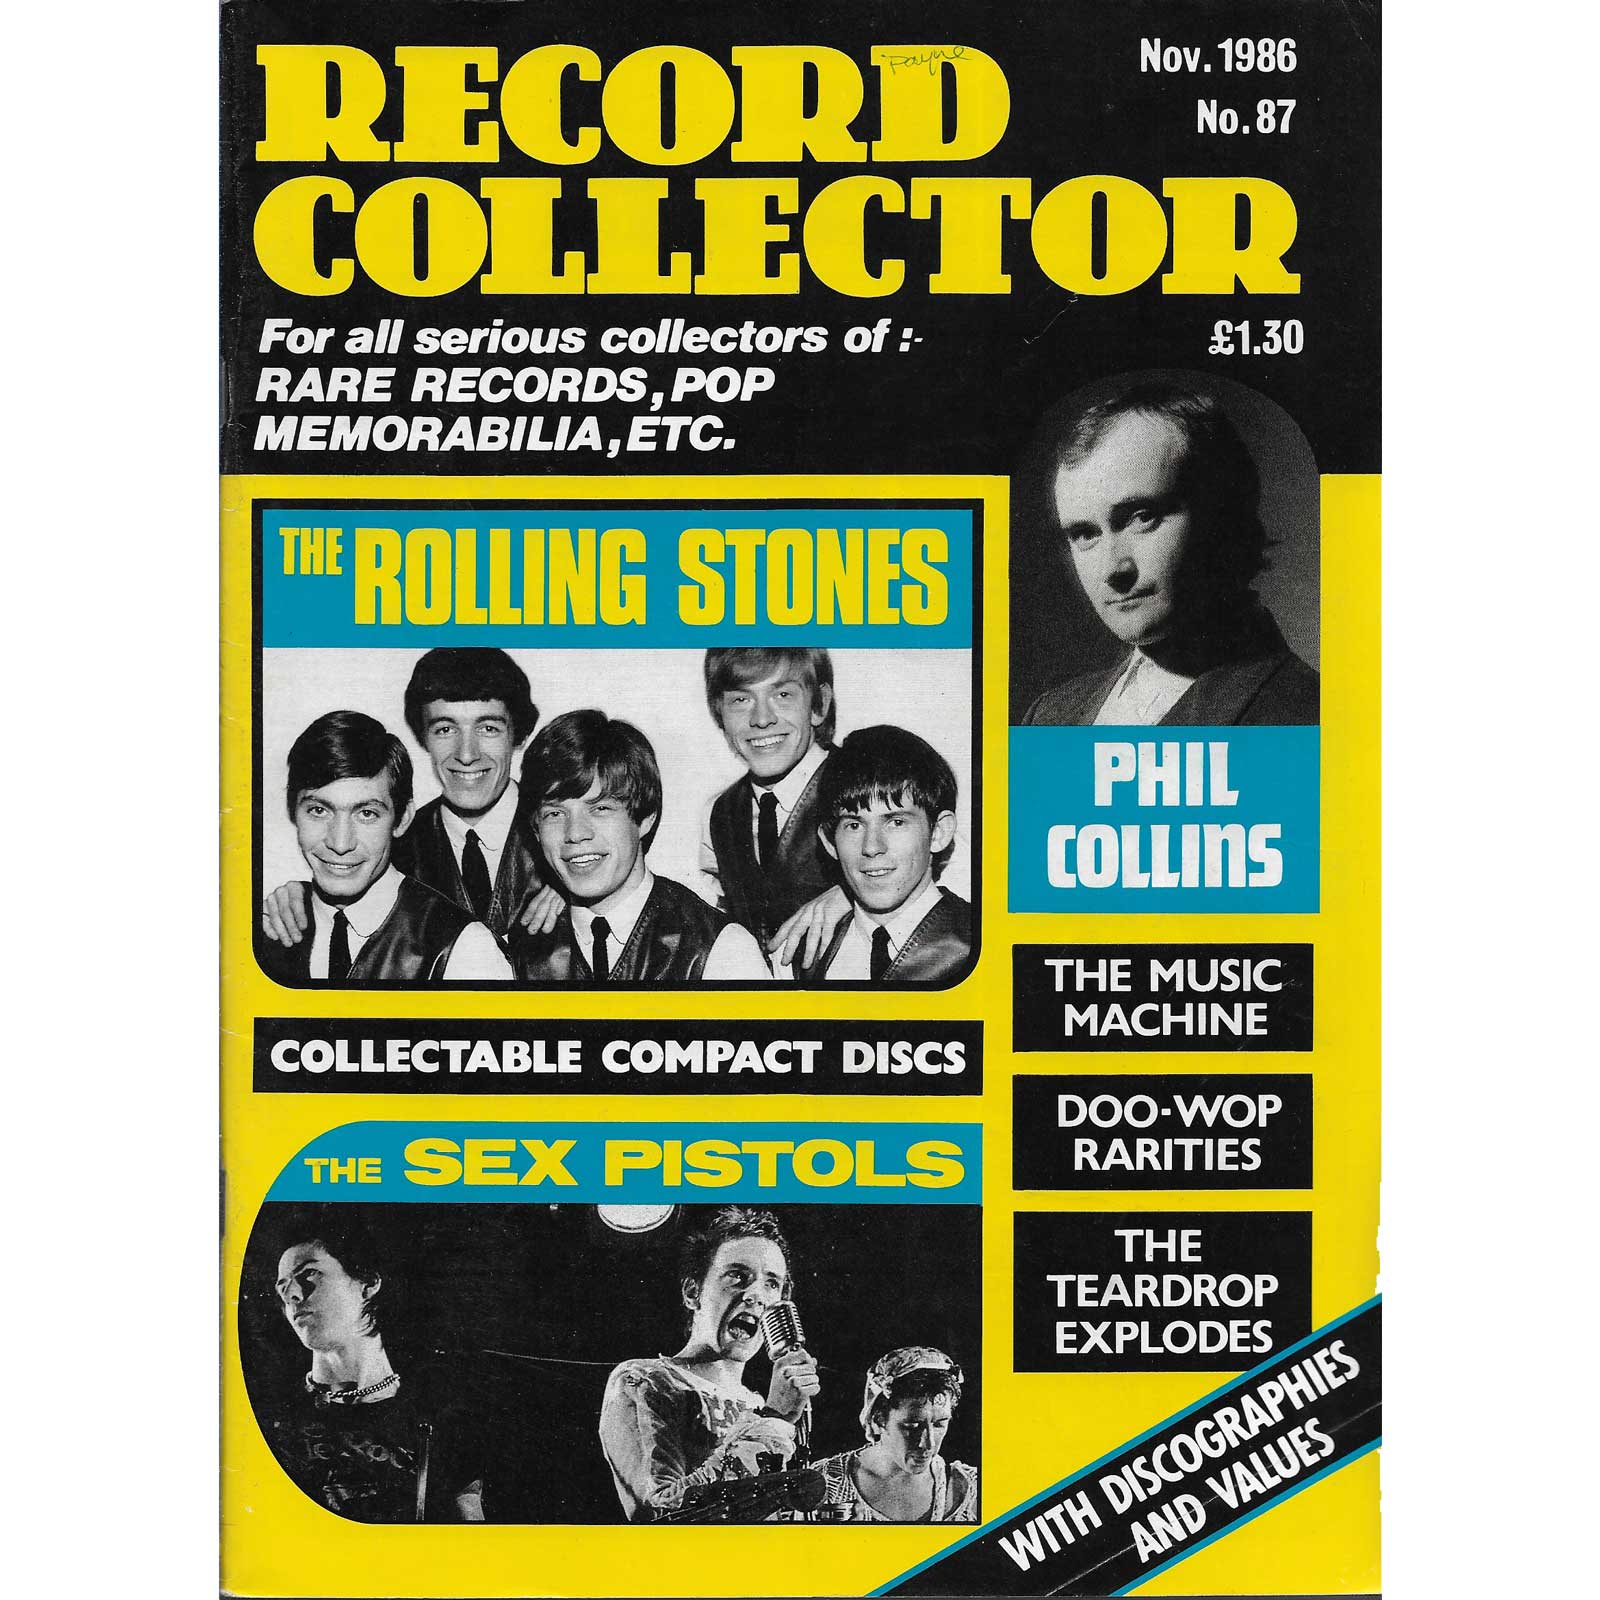 November 1986 BUY NOW Record Collector magazine Issue no 87